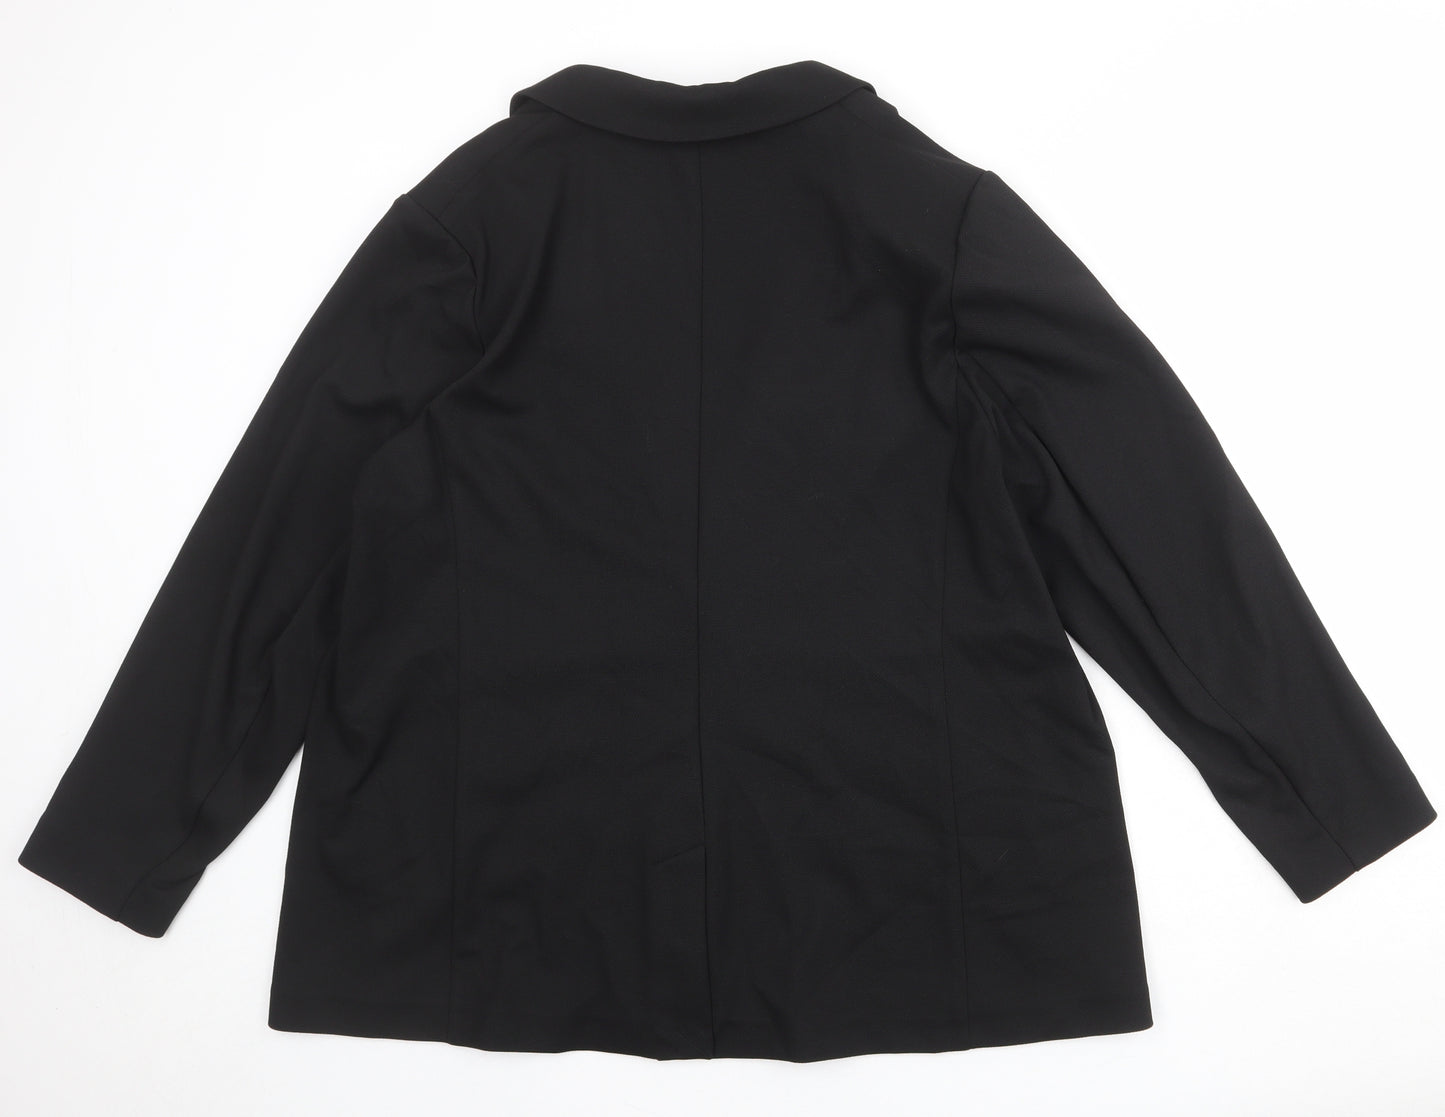 Marks and Spencer Womens Black Polyester Jacket Blazer Size 22 - Unlined